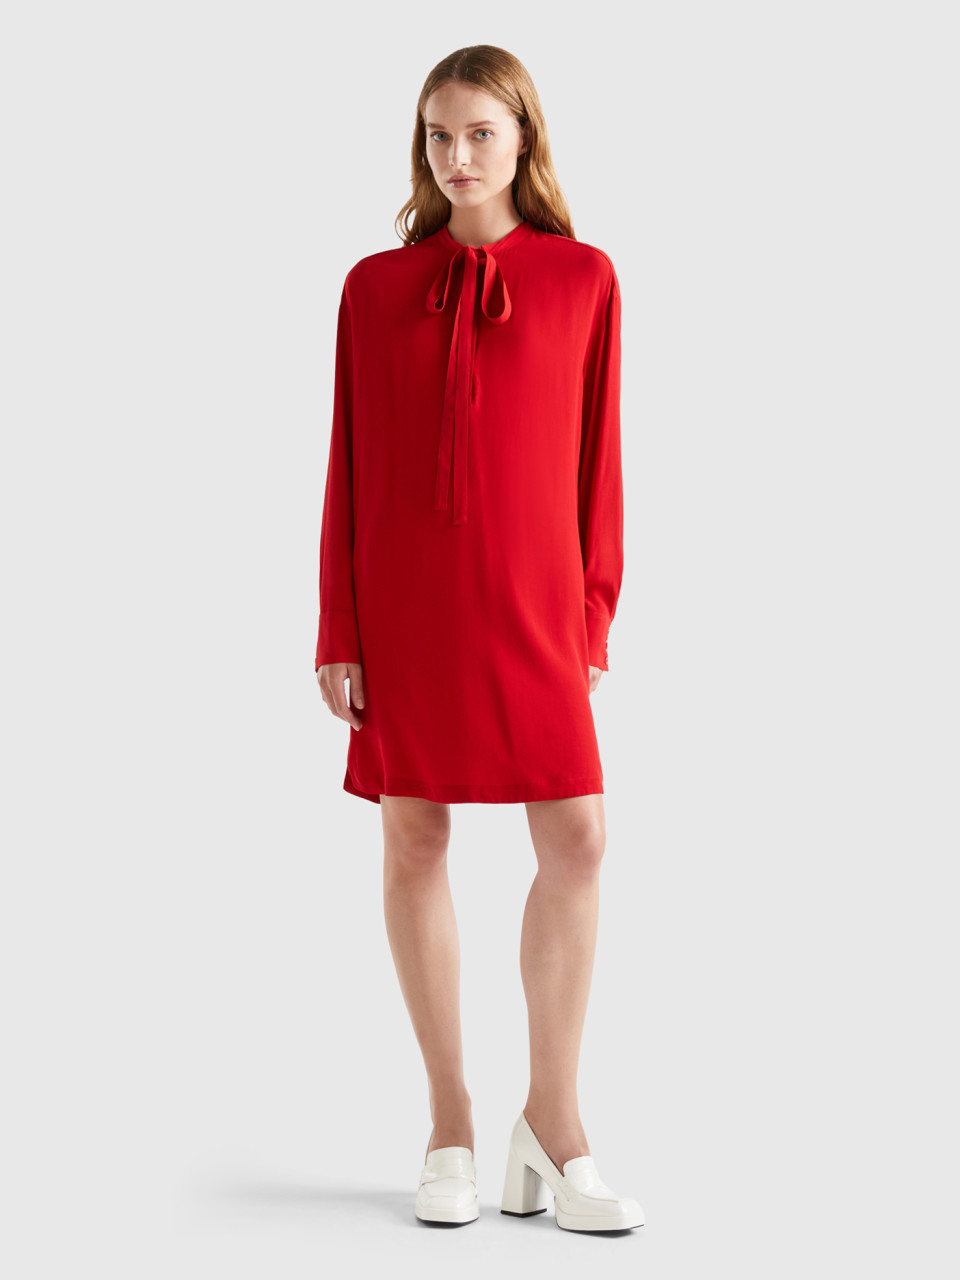 Benetton, Short Dress With Laces, Red, Women